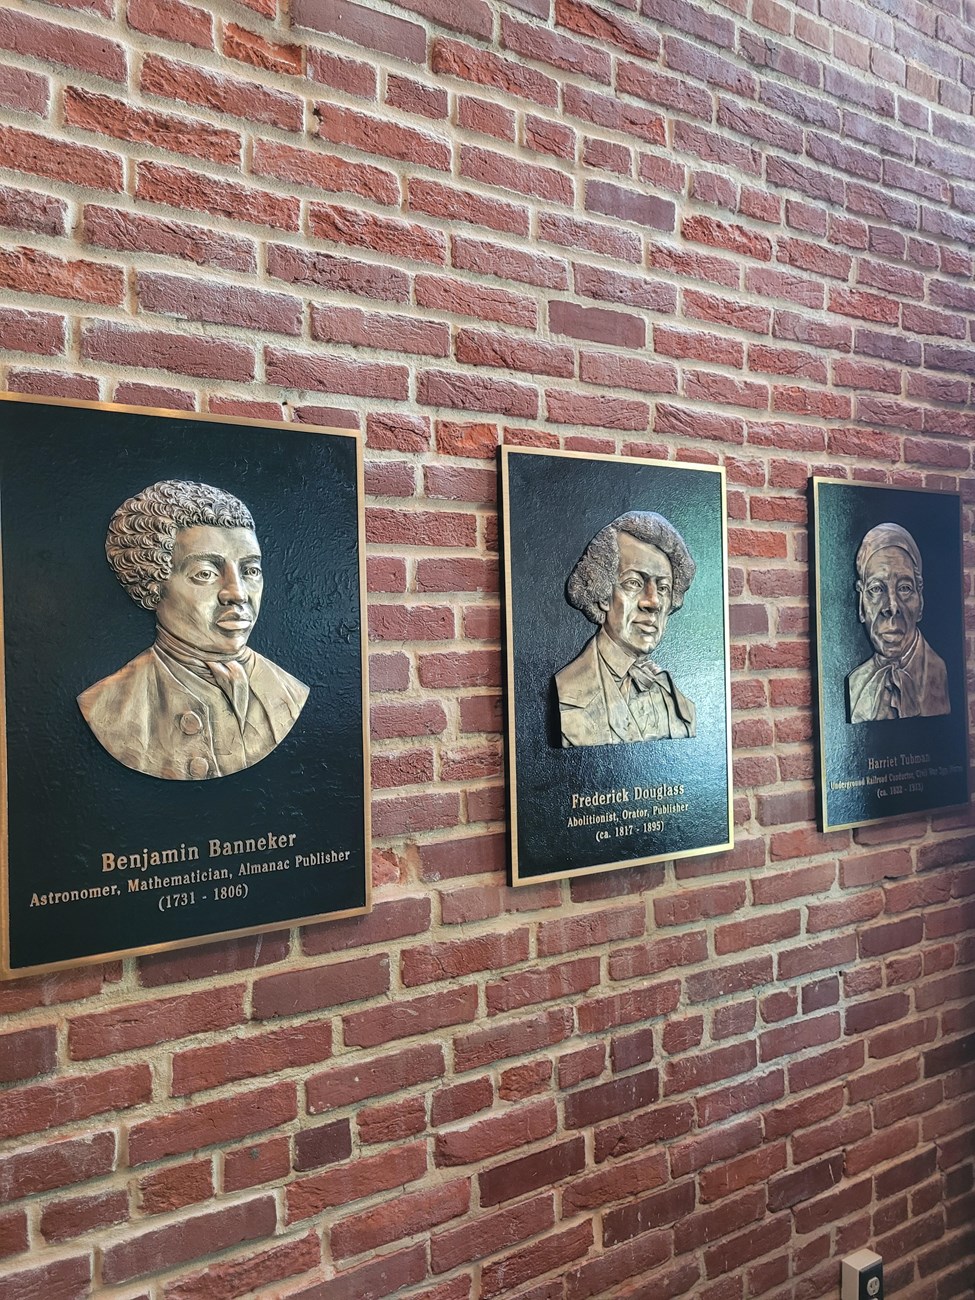 Photograph of three plaques fixed to a brick wall. From left to right, the plaques depict Benjamin Banneker, Frederick Douglass, and Harriet Tubman